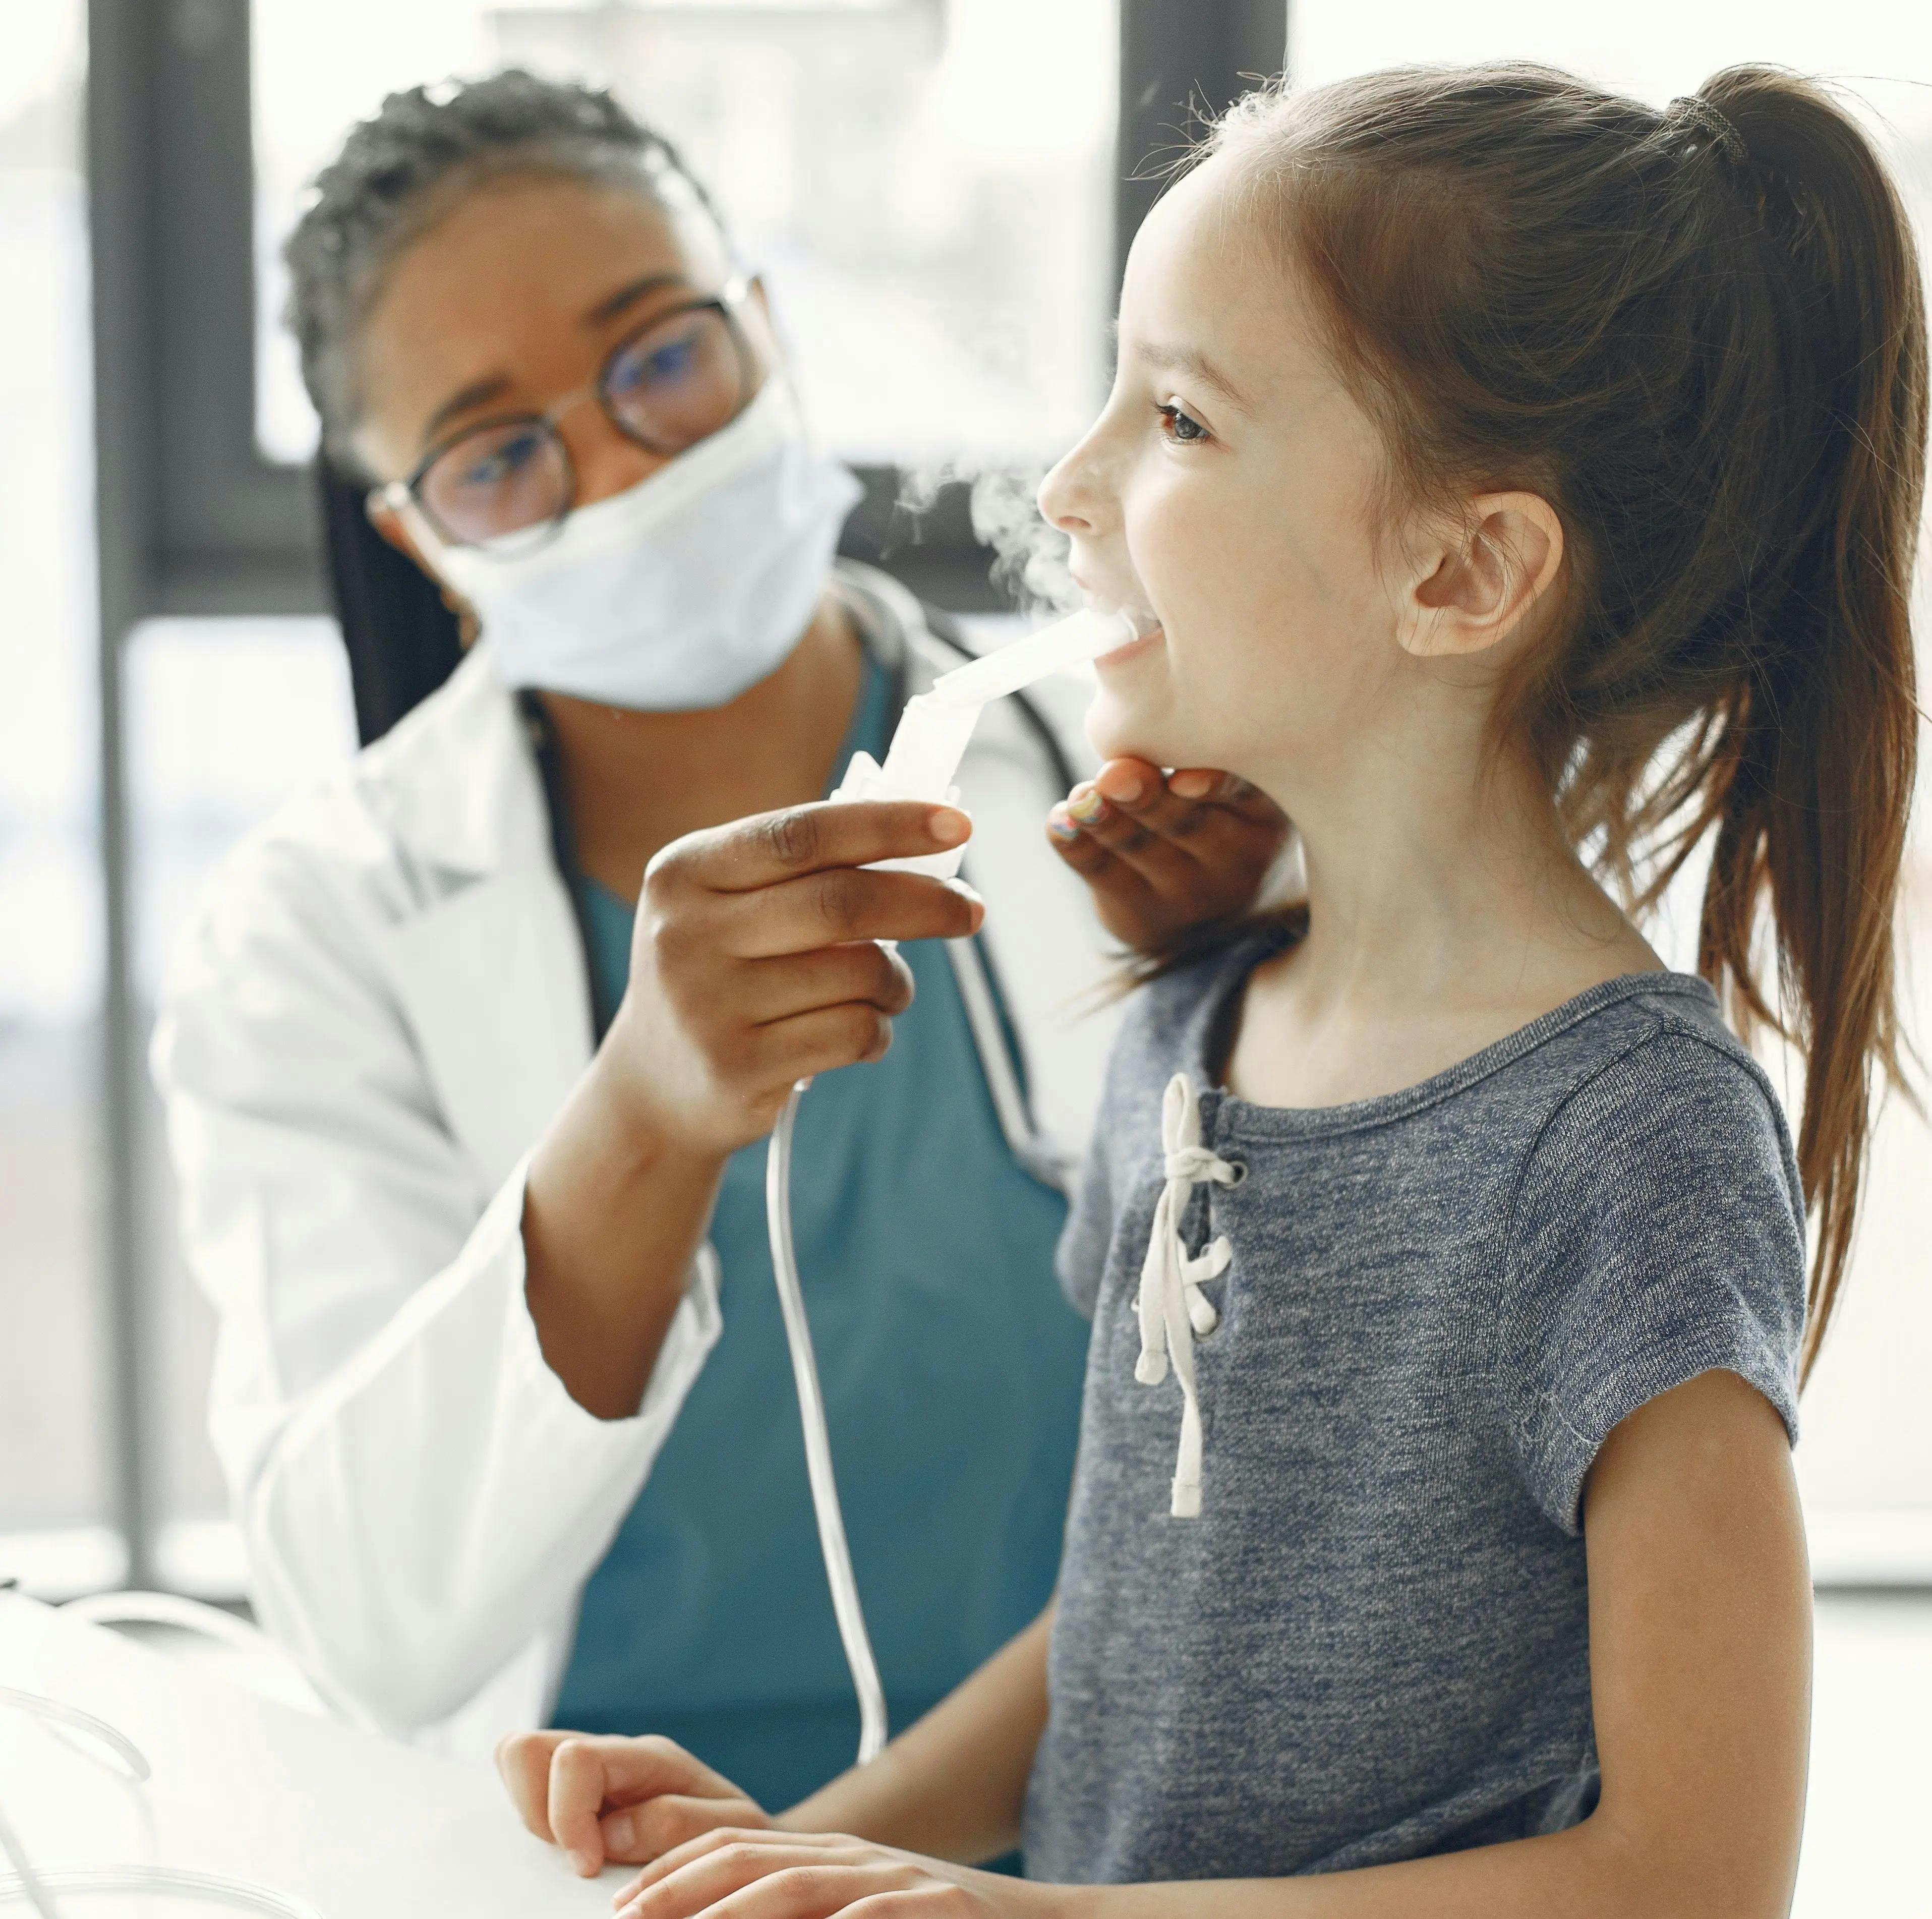 From C-section to childhood asthma: new evidence sheds light on the relationship